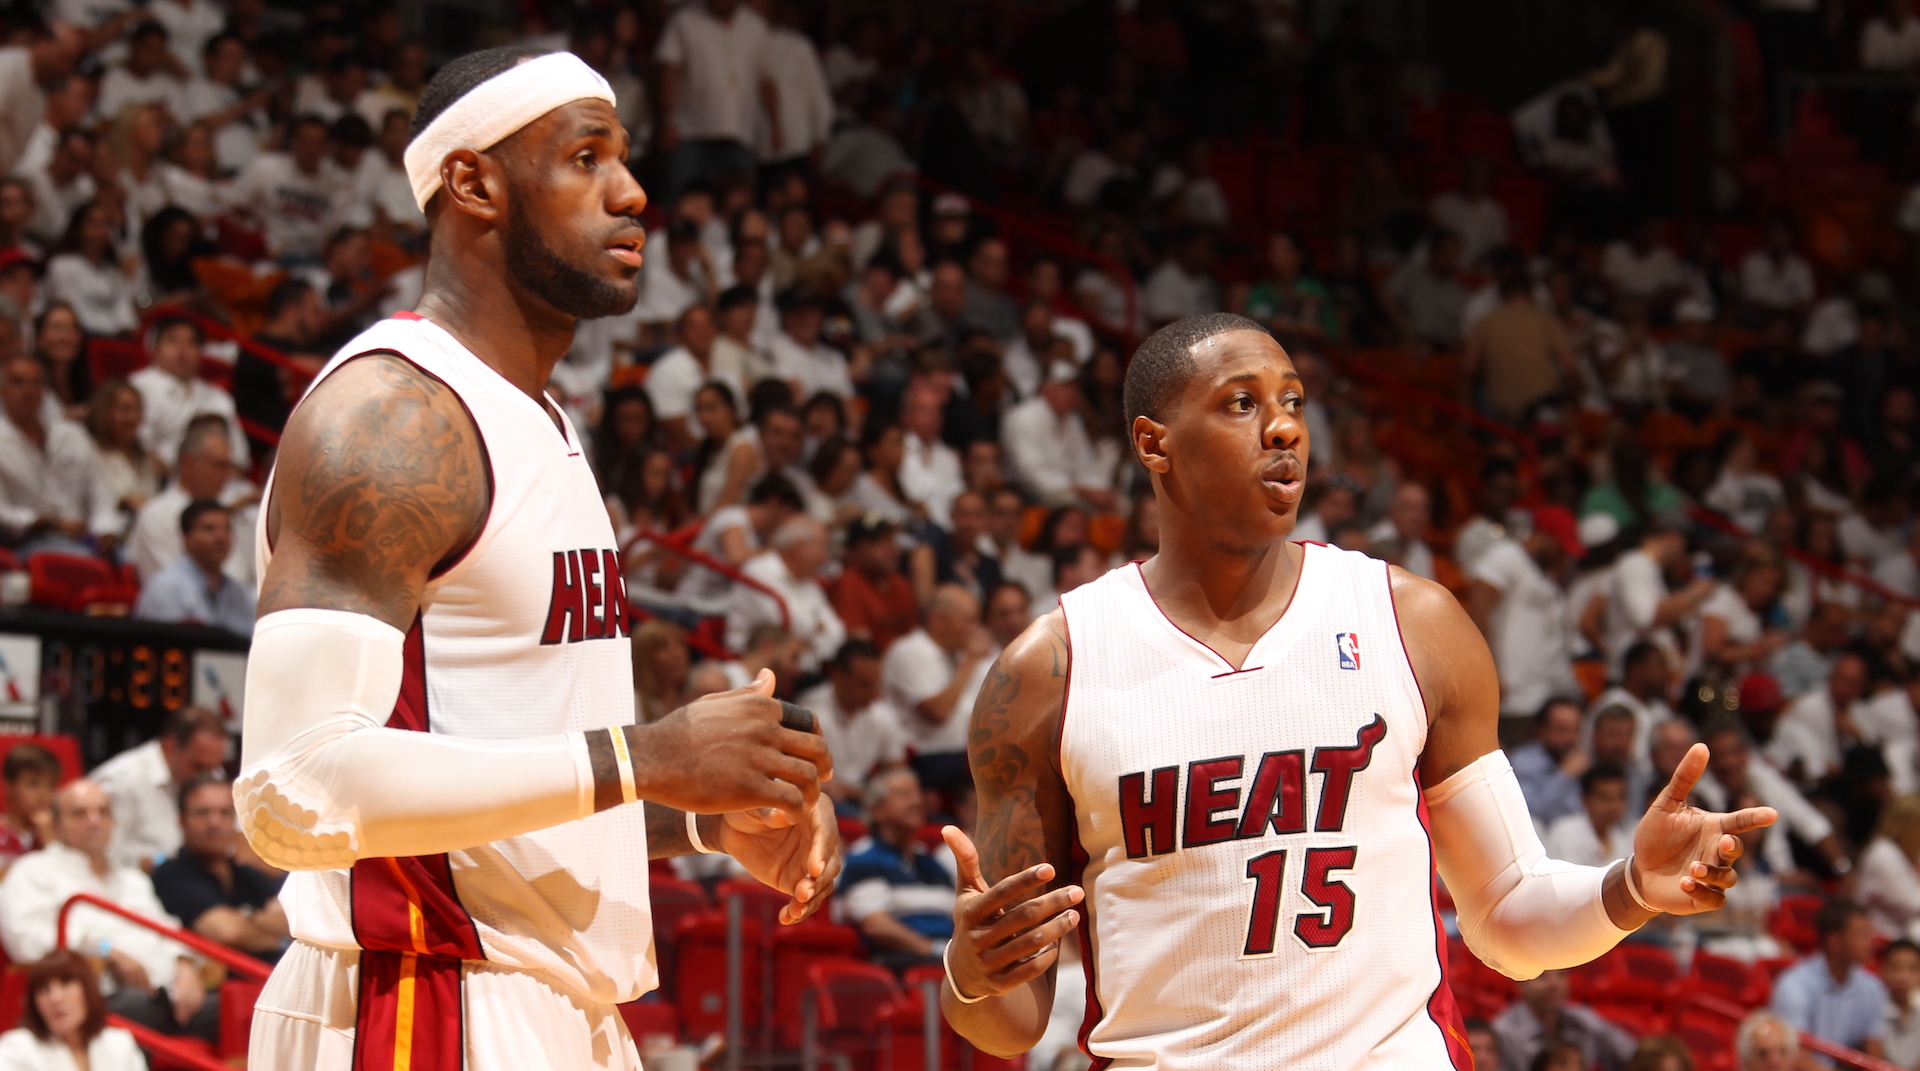 Mario Chalmers refers to LeBron James as 'that guy' - NBC Sports